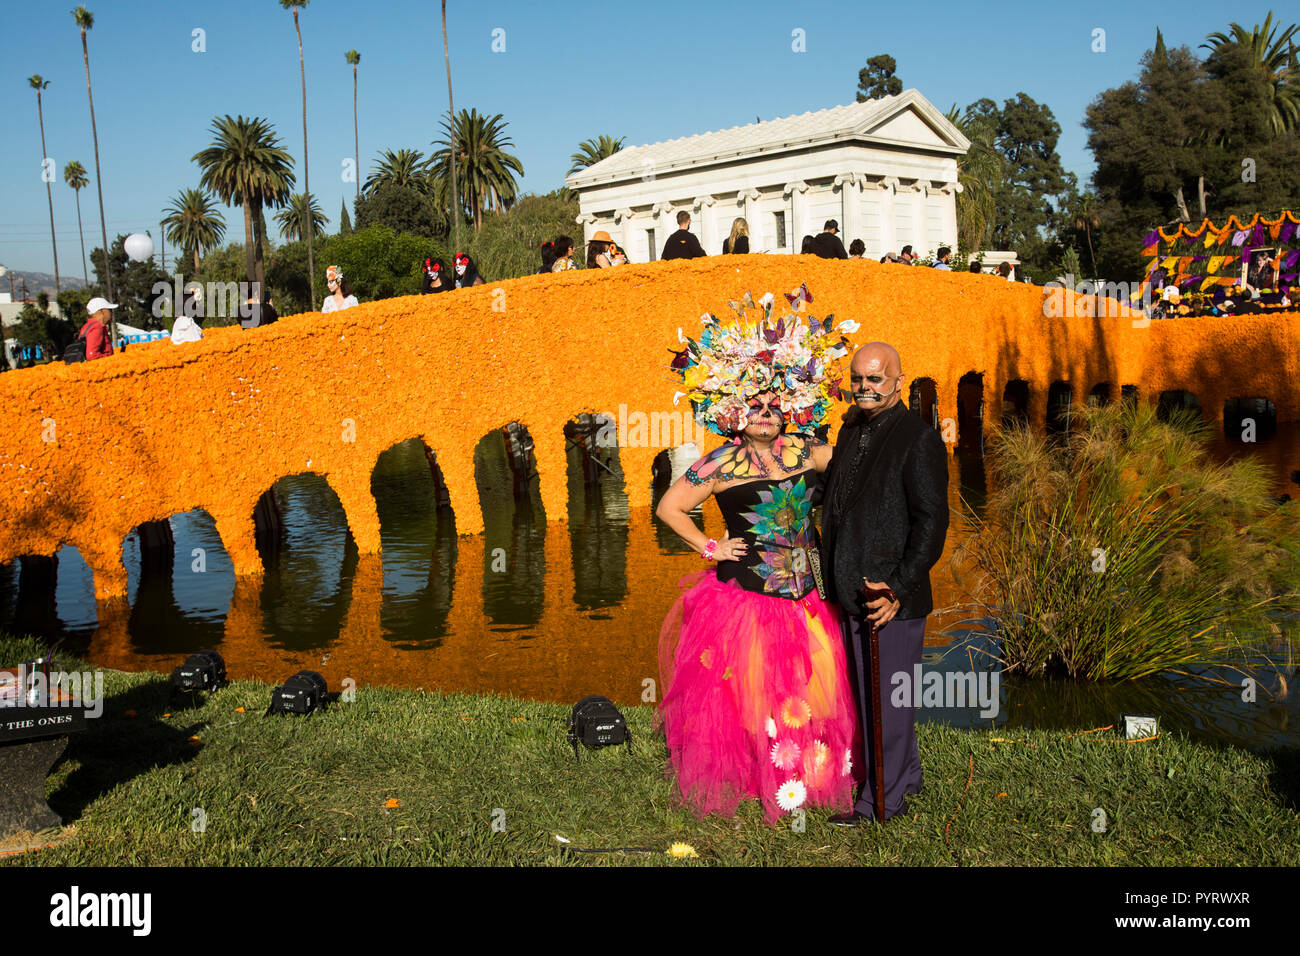 Dia de los Muertos (Day of the Dead) festival at Hollywood Forever